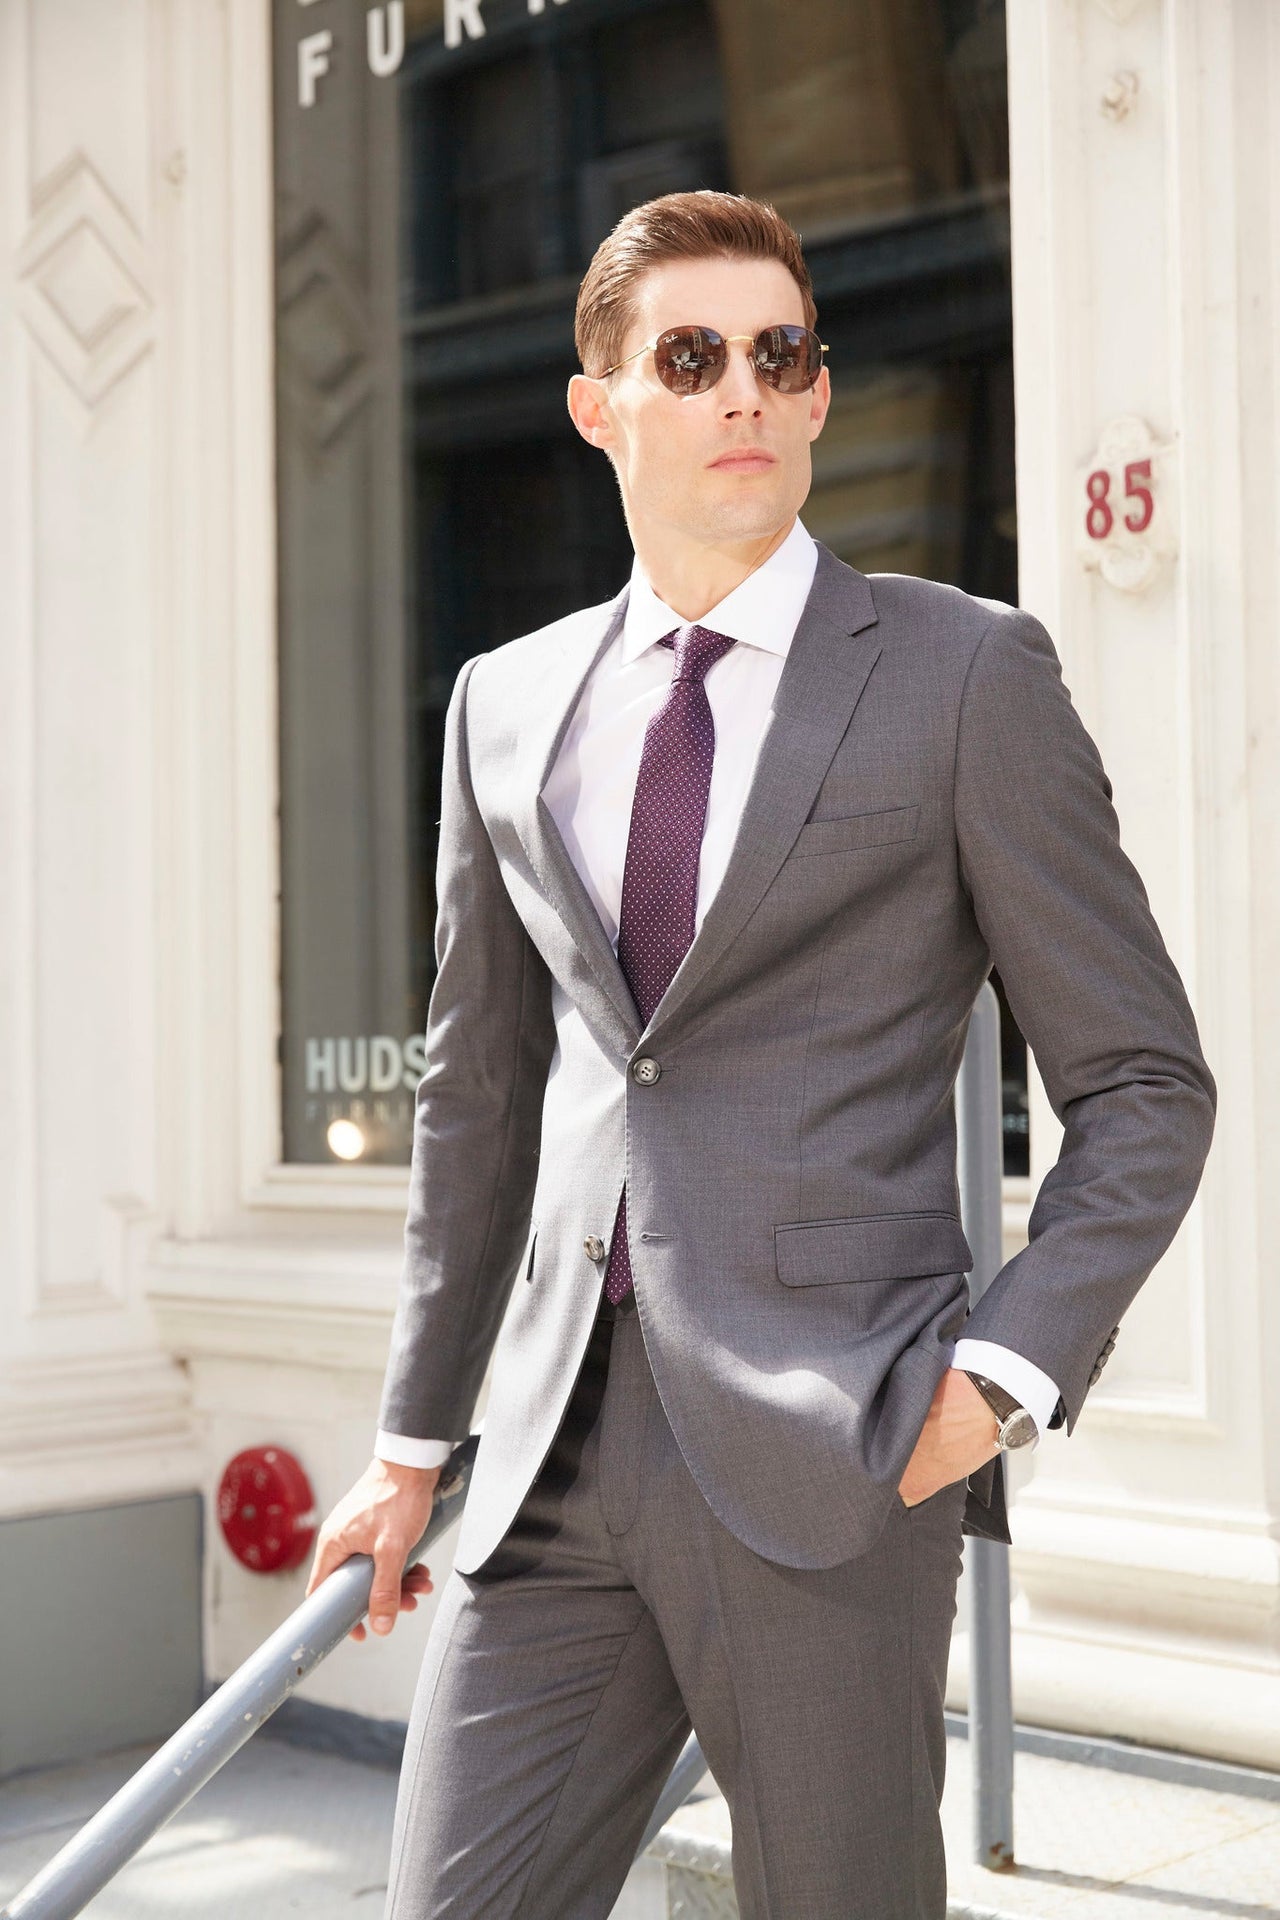 Medium Grey Suit | Buy A Modern Grey Wool Suit For Men From Tomasso ...